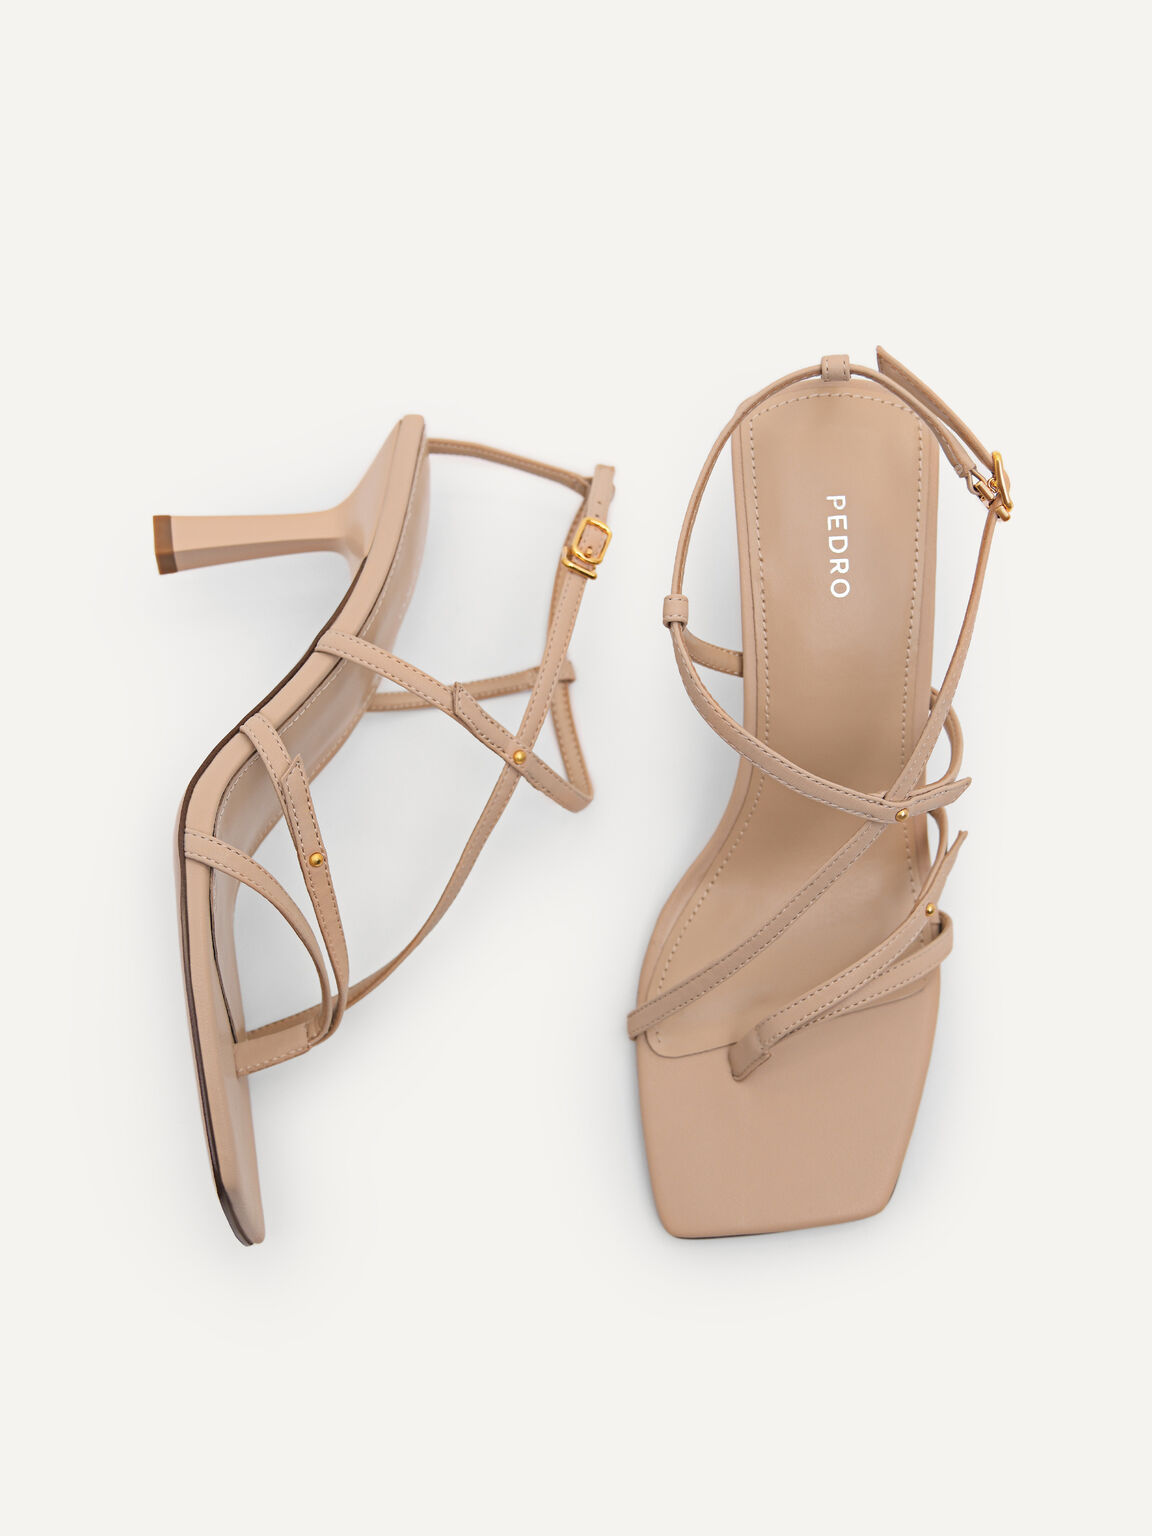 Strappy Heeled Sandals, Sand